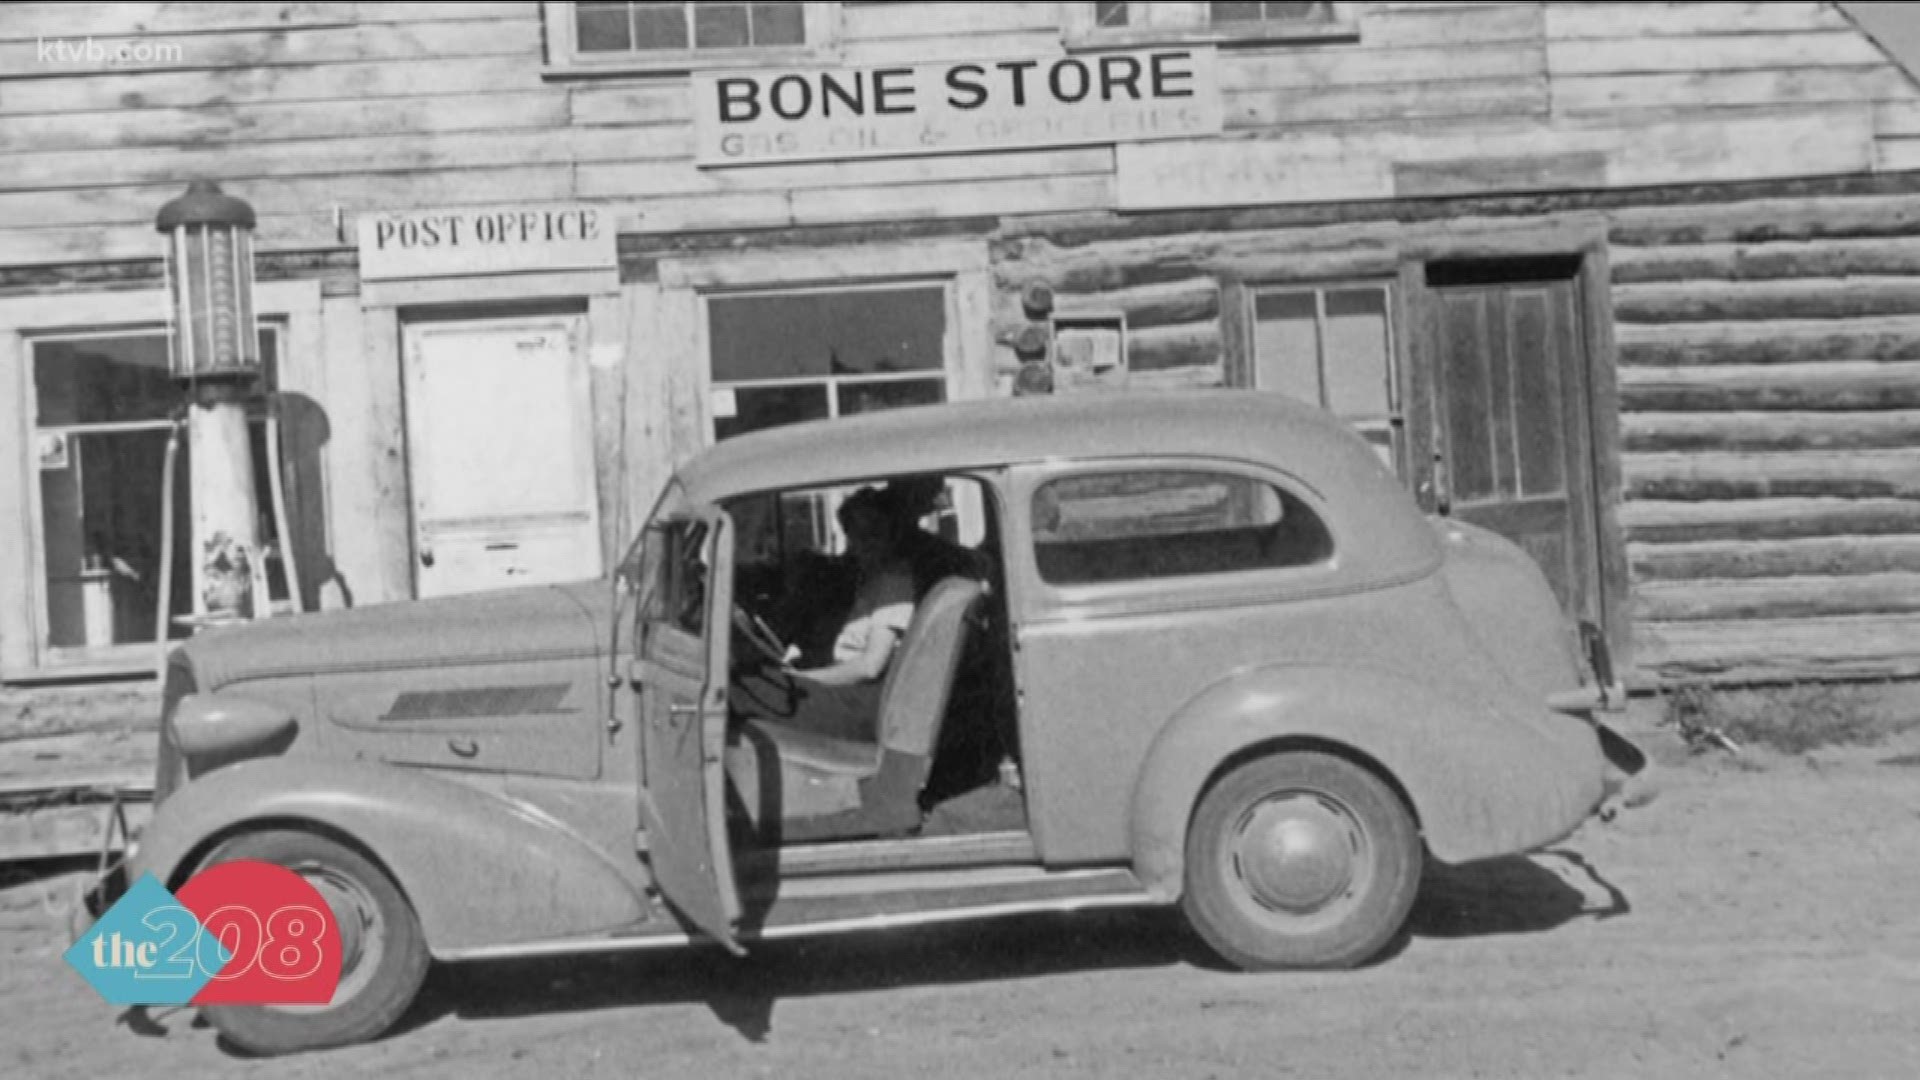 Bone was one of the last cities in the country to get phone service in the 1980s.